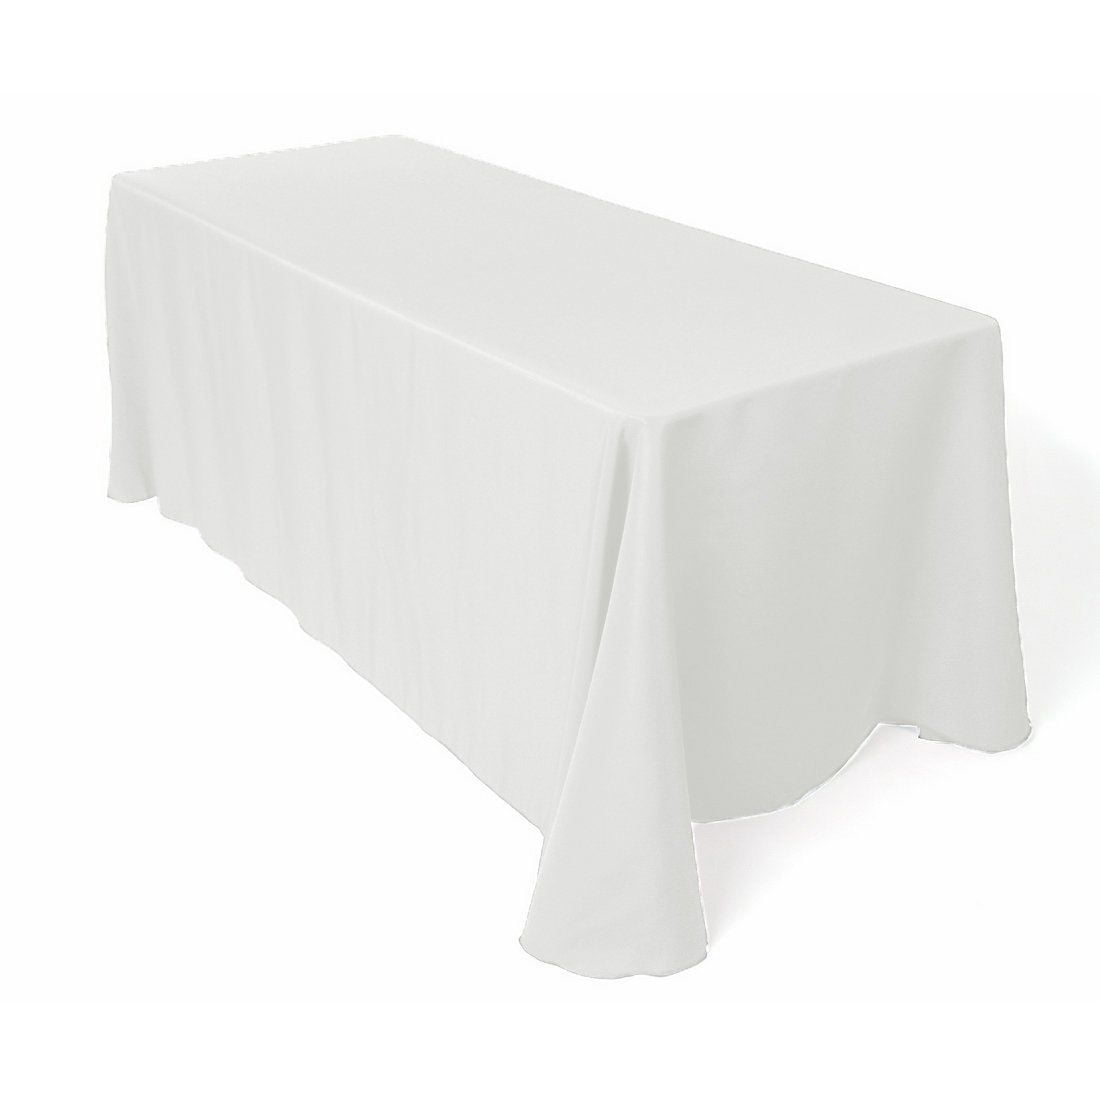 1 5 10 Pcs Polyester Tablecloth Table Cover Cloth Banquet Wedding Party 